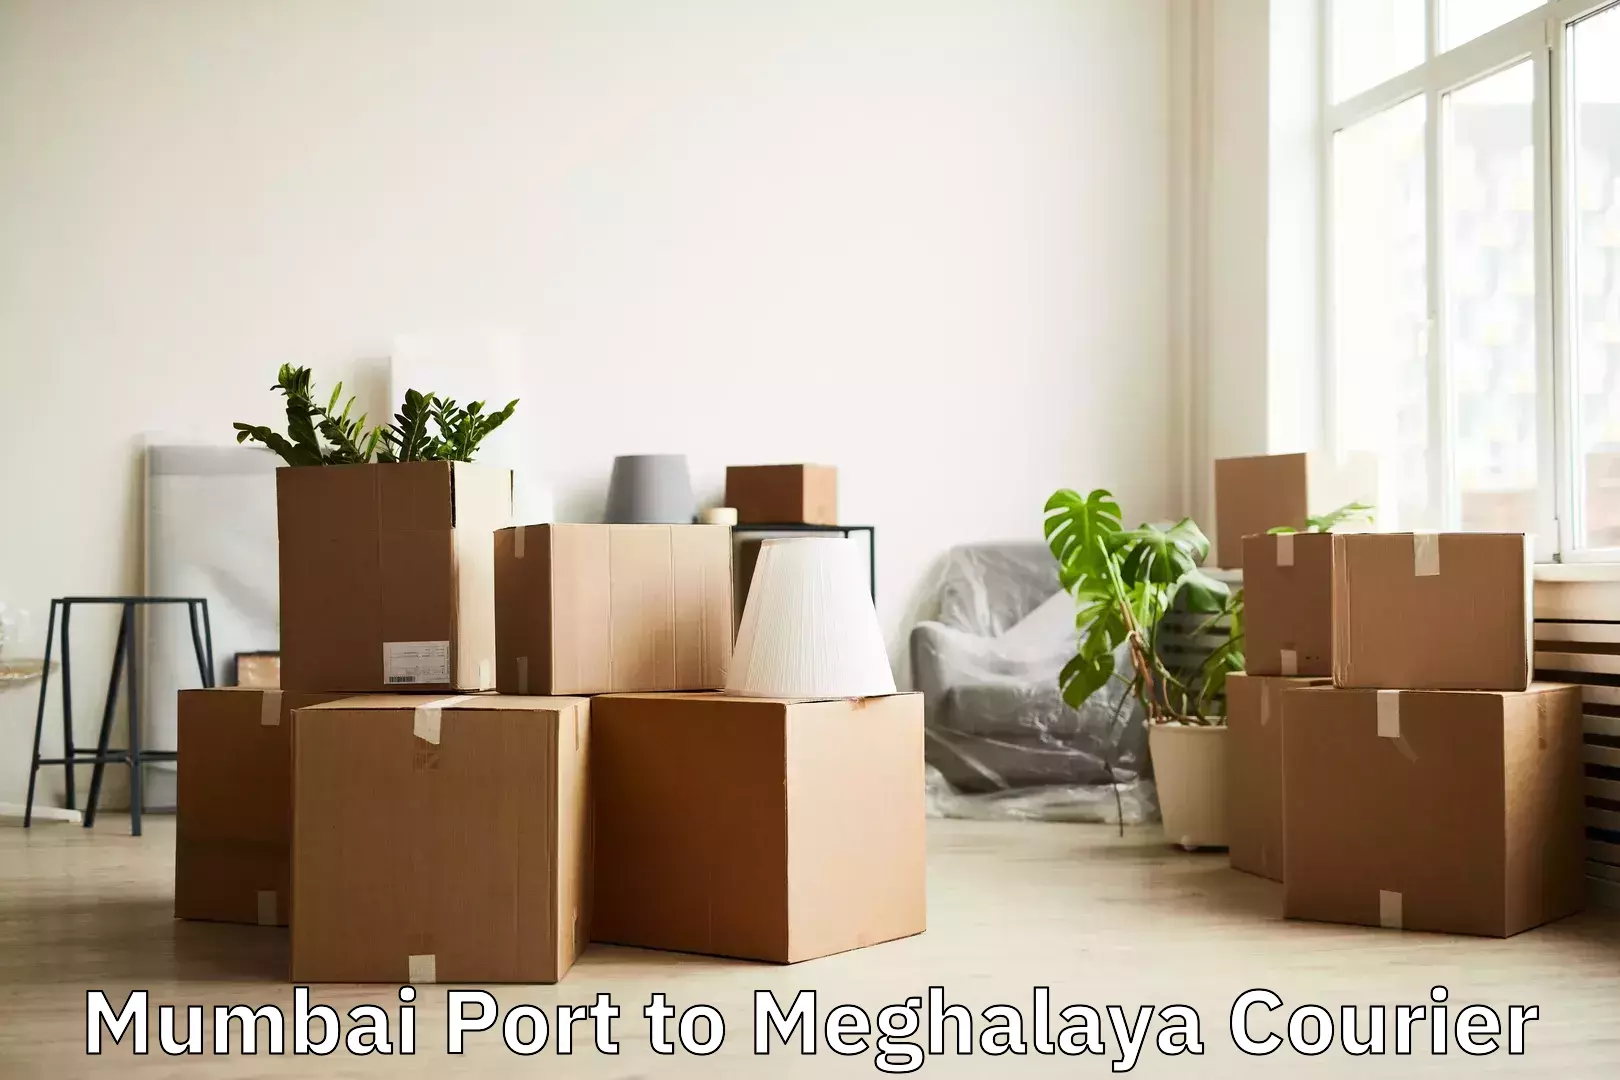 Luggage delivery solutions Mumbai Port to Meghalaya